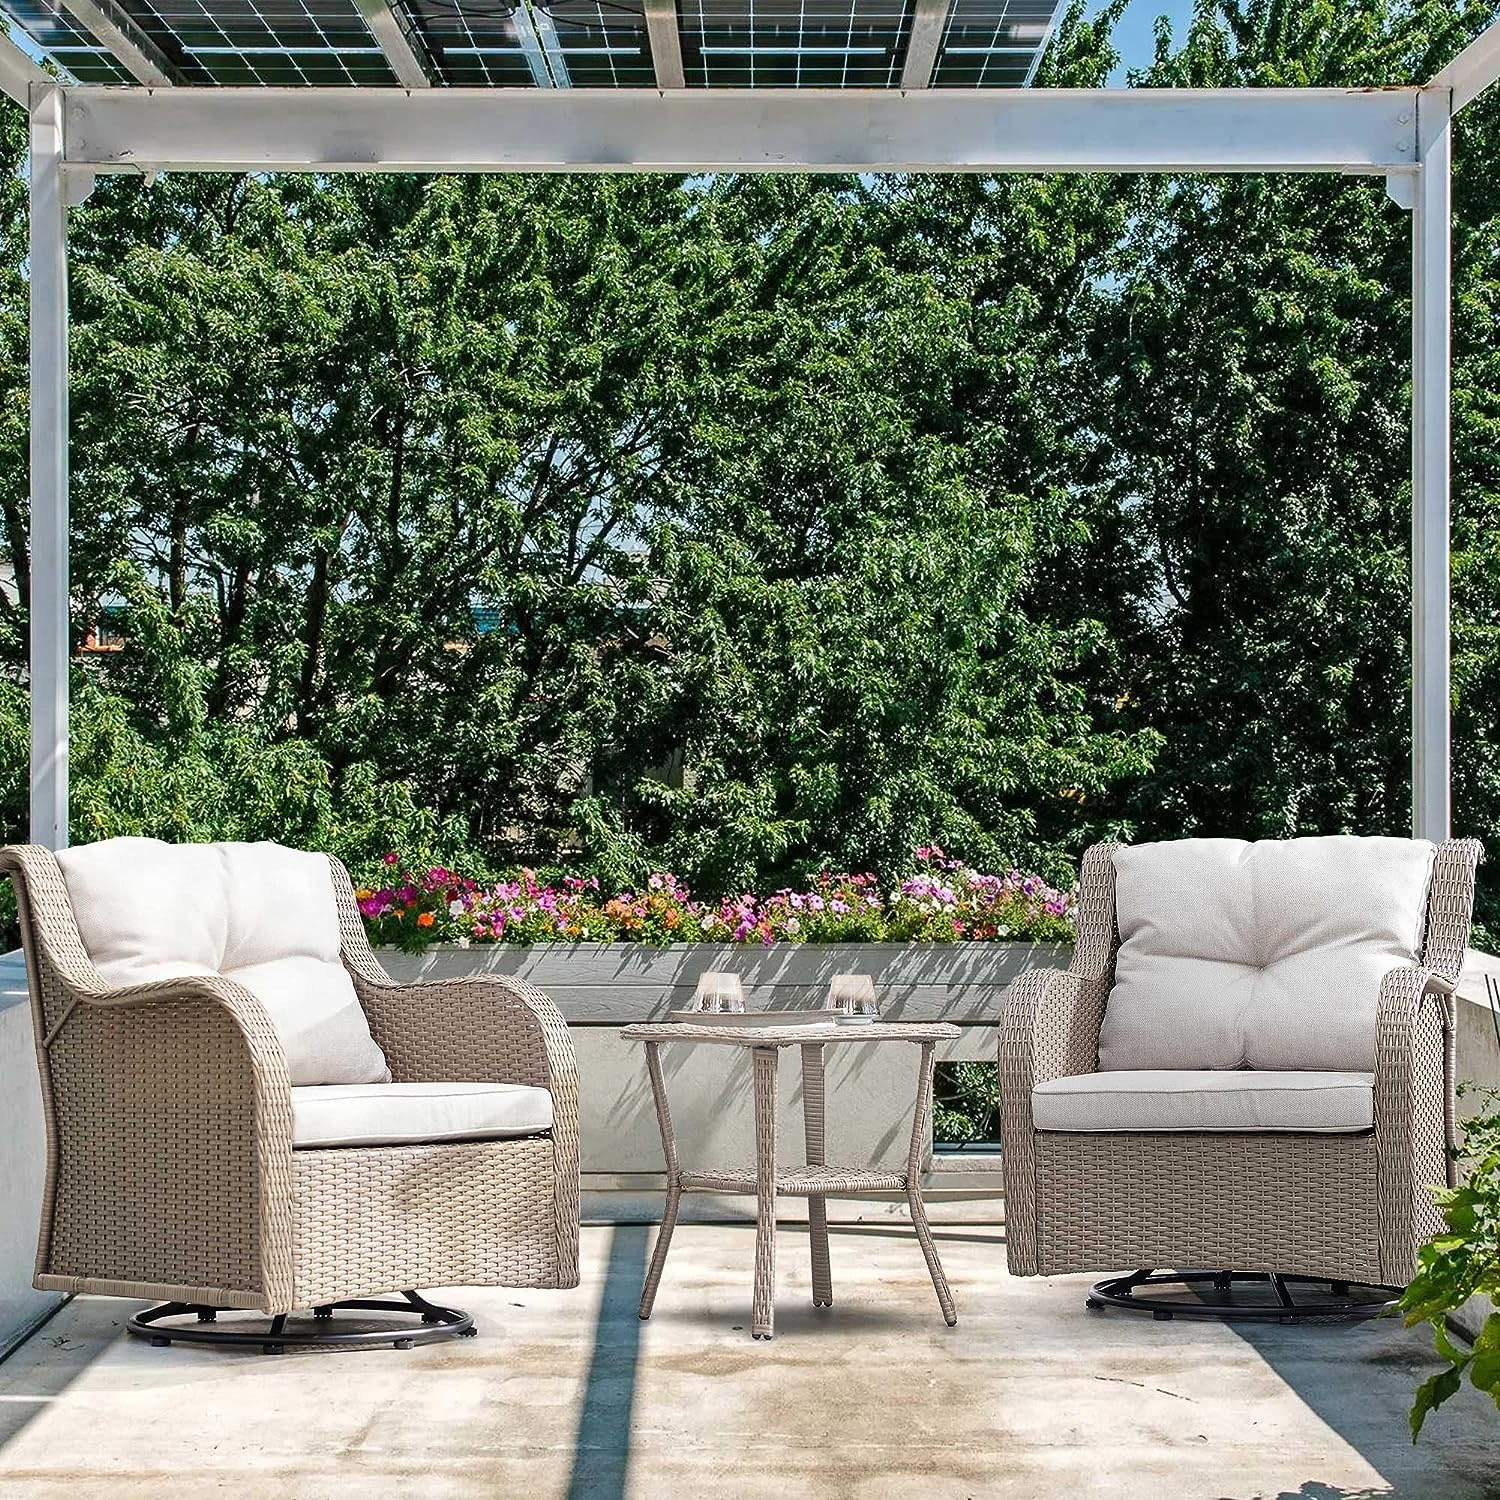 Homedot Outdoor Furniture Sets-3 Pieces Patio Swivel & Rocking Chairs with Side Table. 